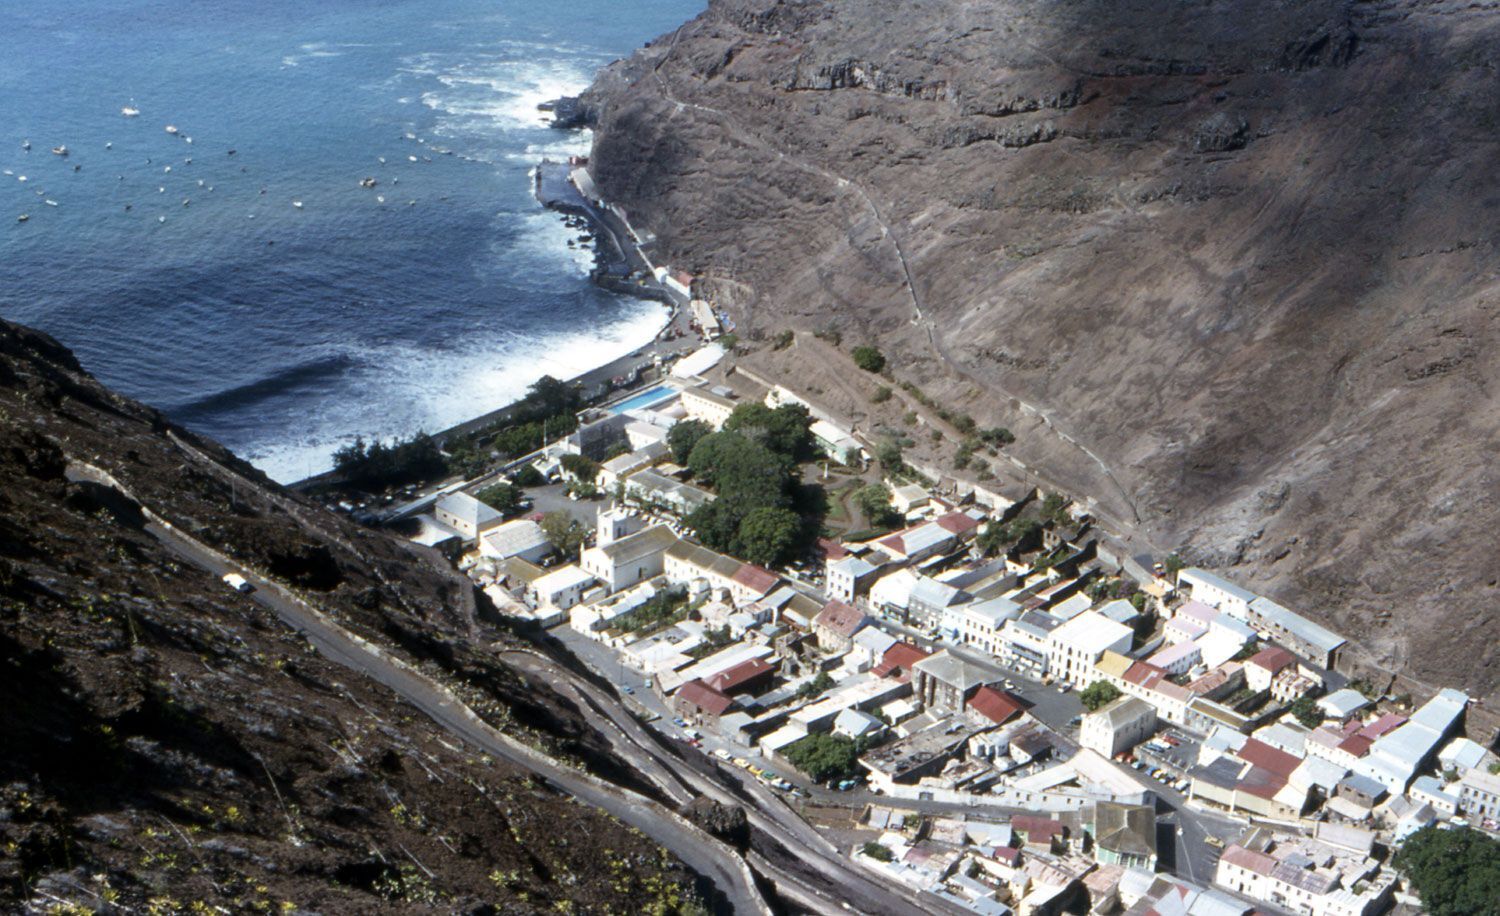 Saint Helena: what is one of the most remote corners of the world known for?